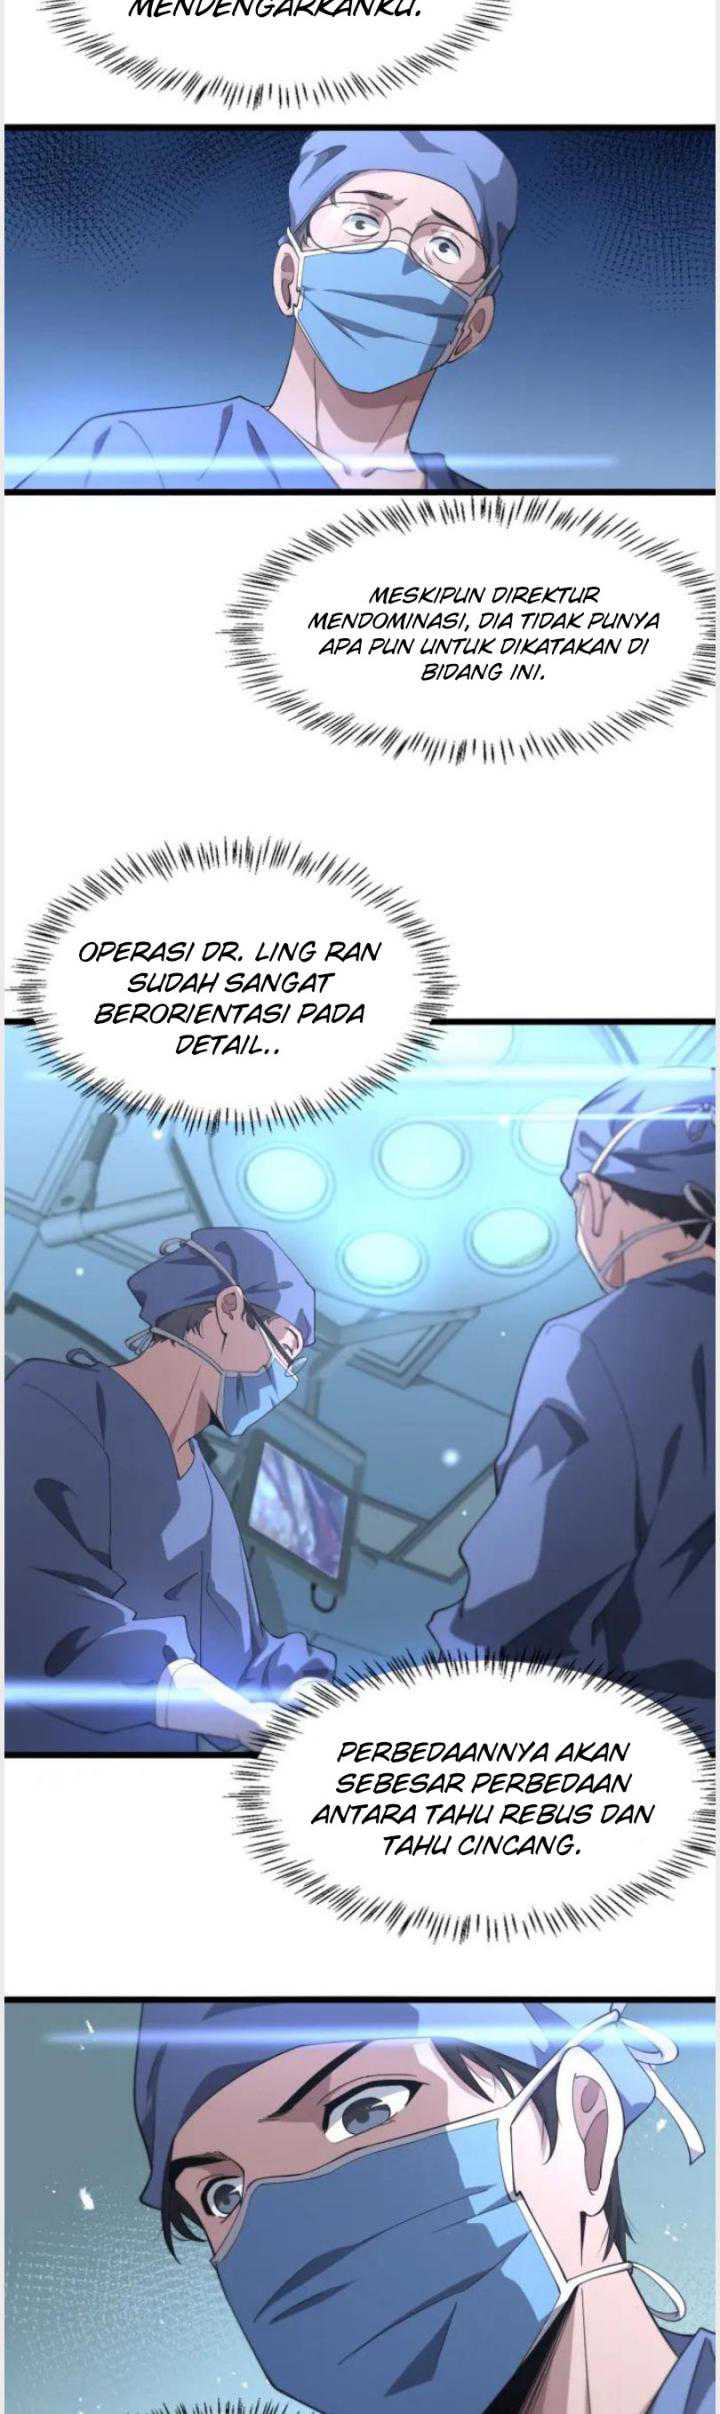 Great Doctor Ling Ran Chapter 159